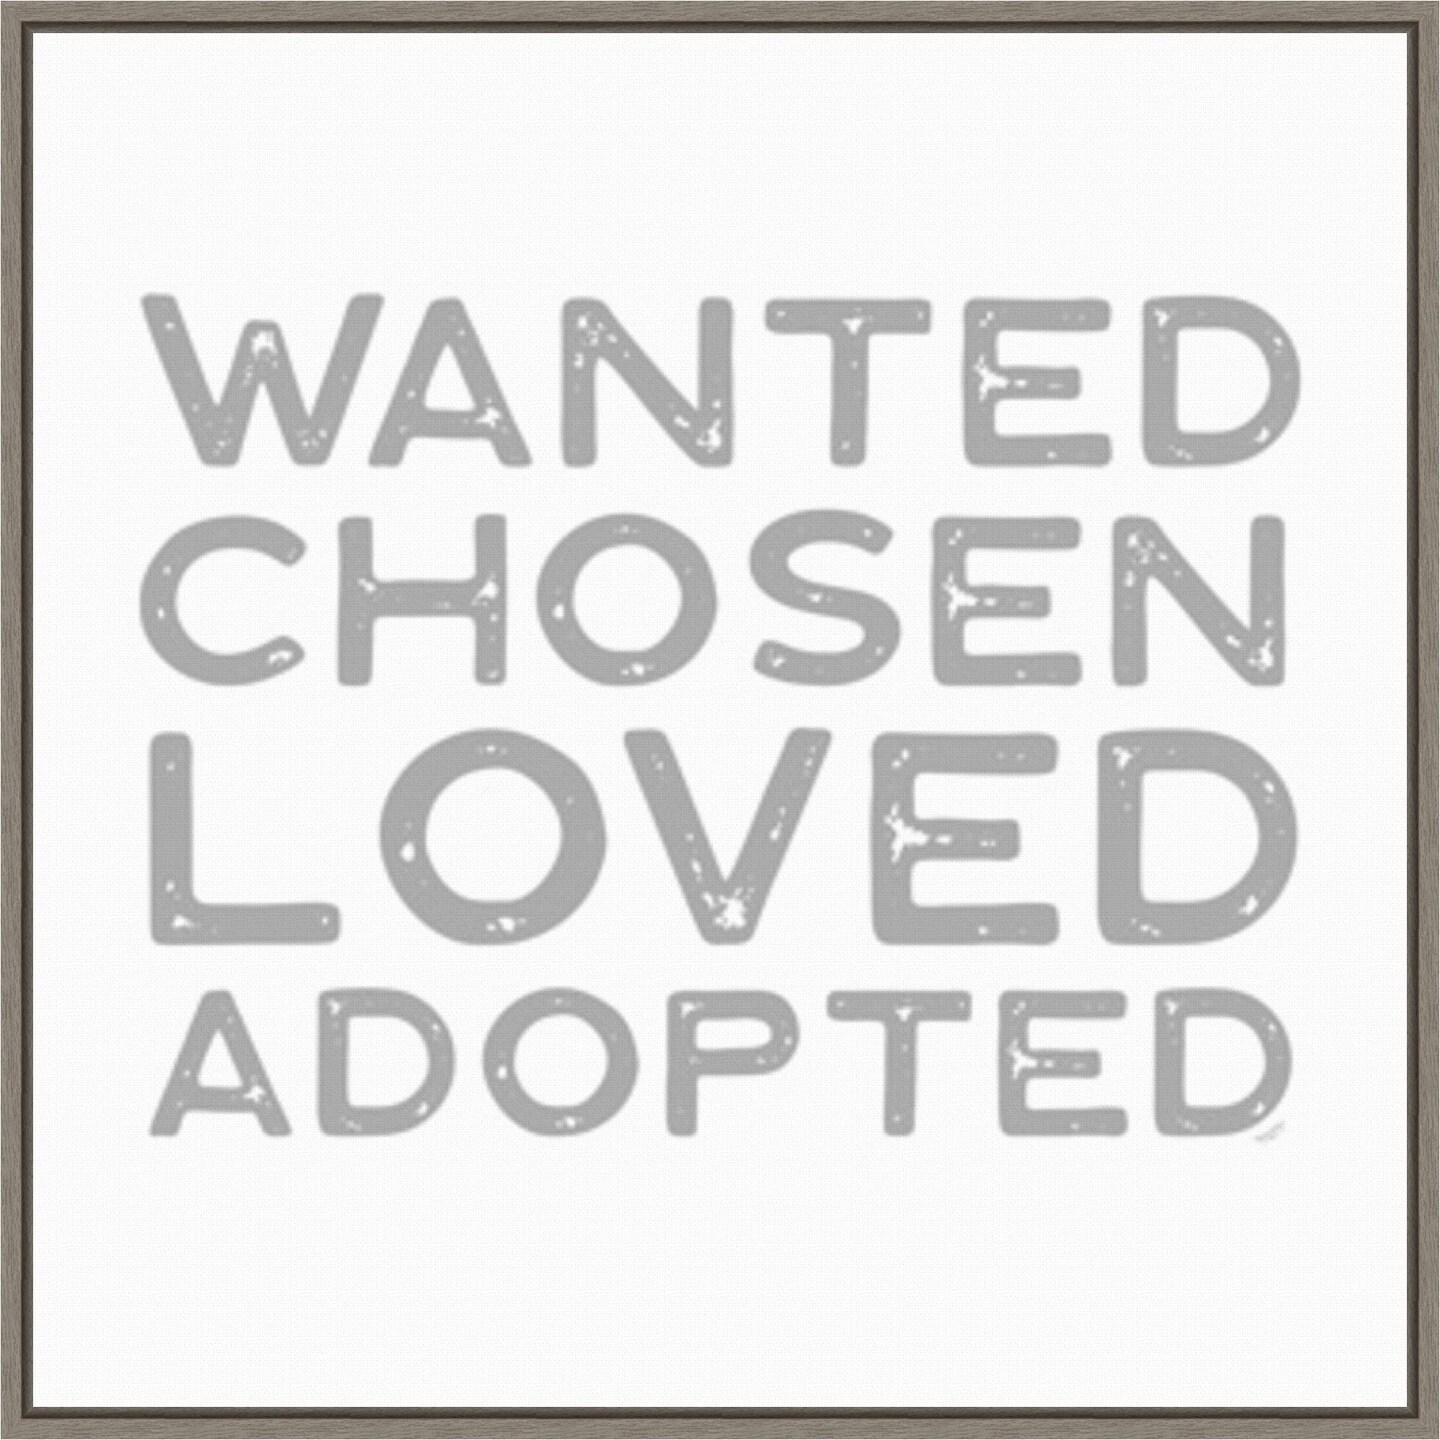 Adoption Sentiments IV Wanted by Tara Reed 22-in. W x 22-in. H. Canvas Wall Art Print Framed in Grey